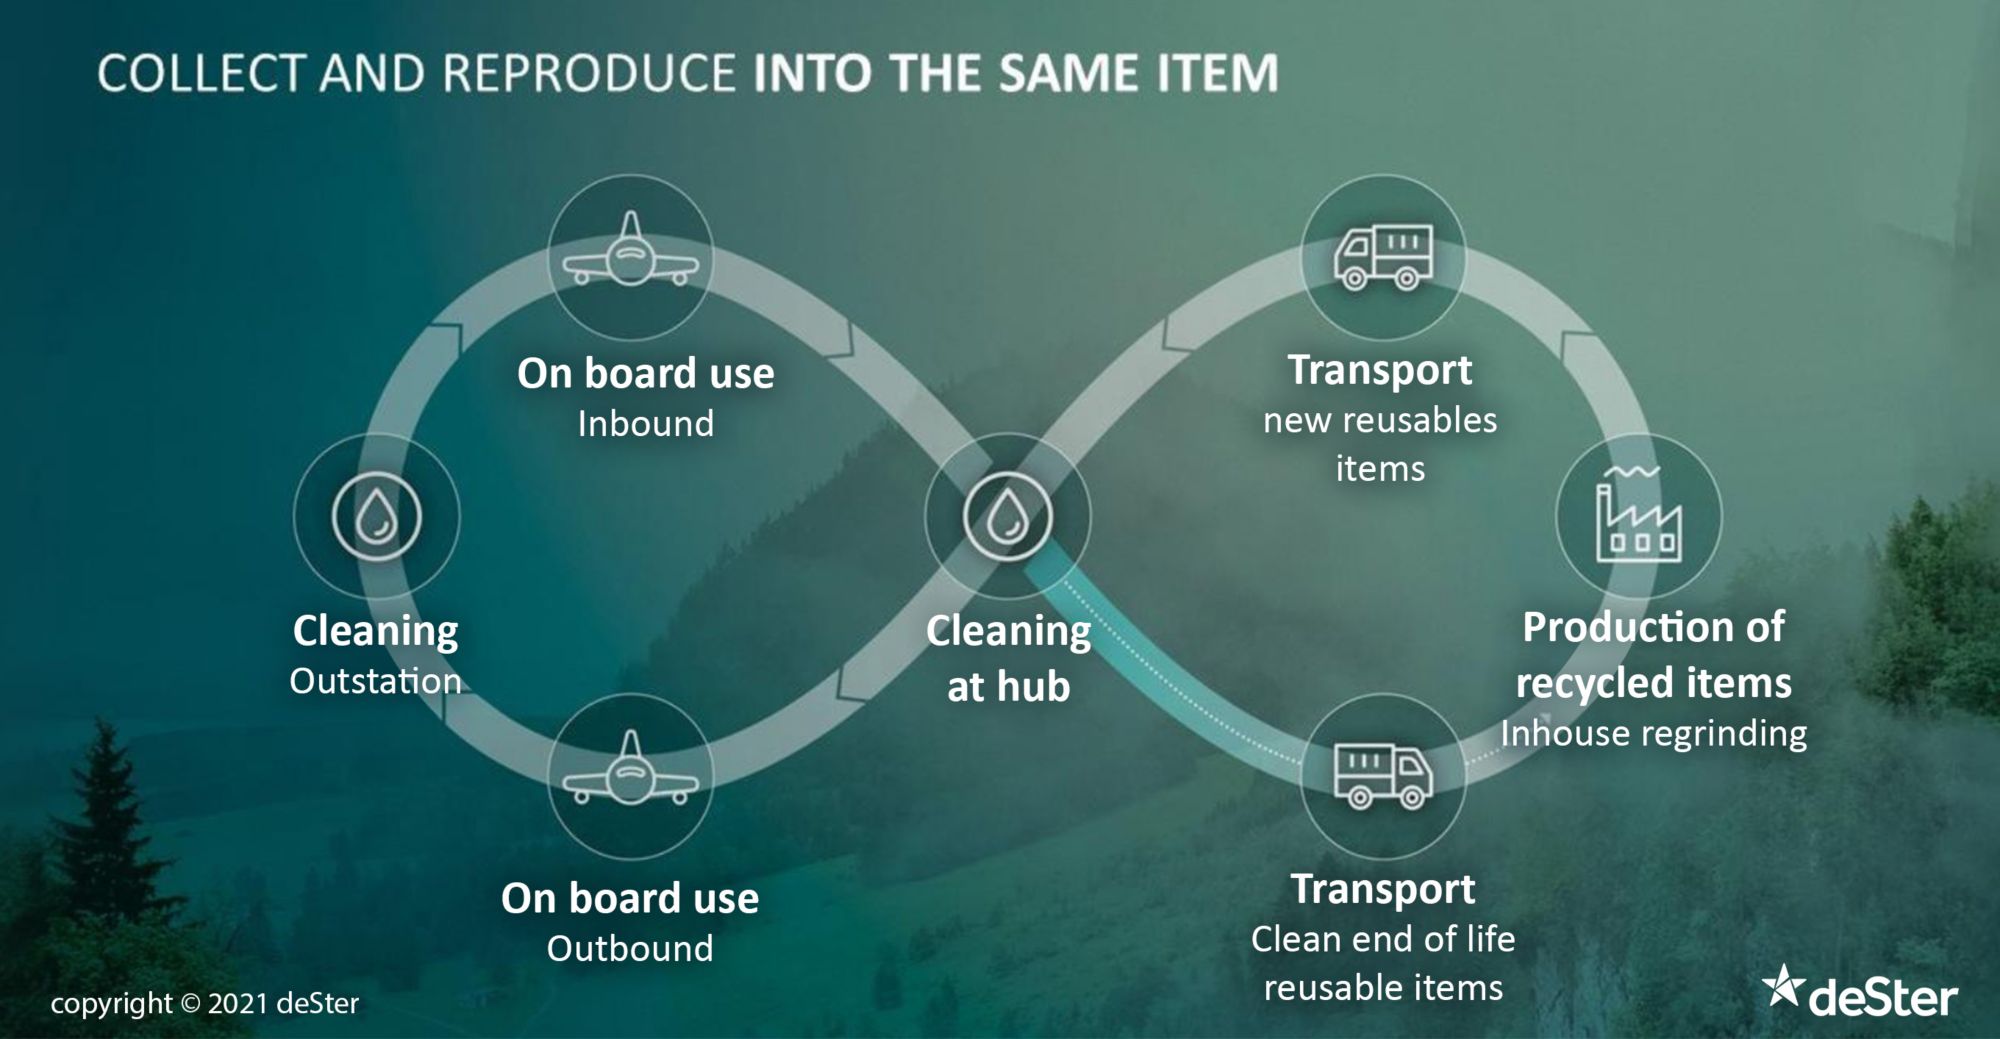 Lifecycle graphic of how drinkware can be used in flight, cleaned and recycled into the same item infinitely when collected and transported.  